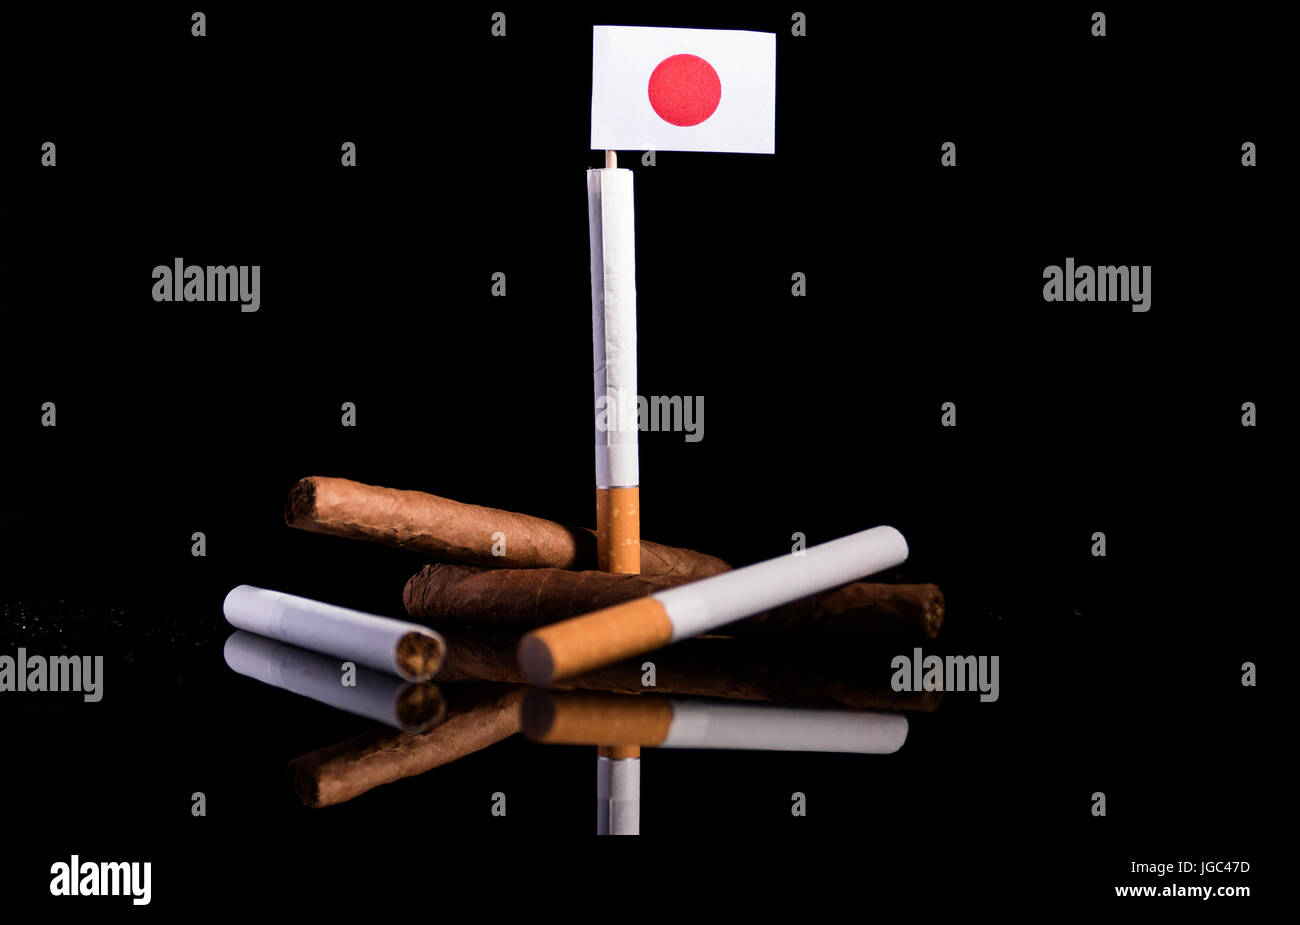 Japanese flag with cigarettes and cigars. Tobacco Industry concept. Stock Photo